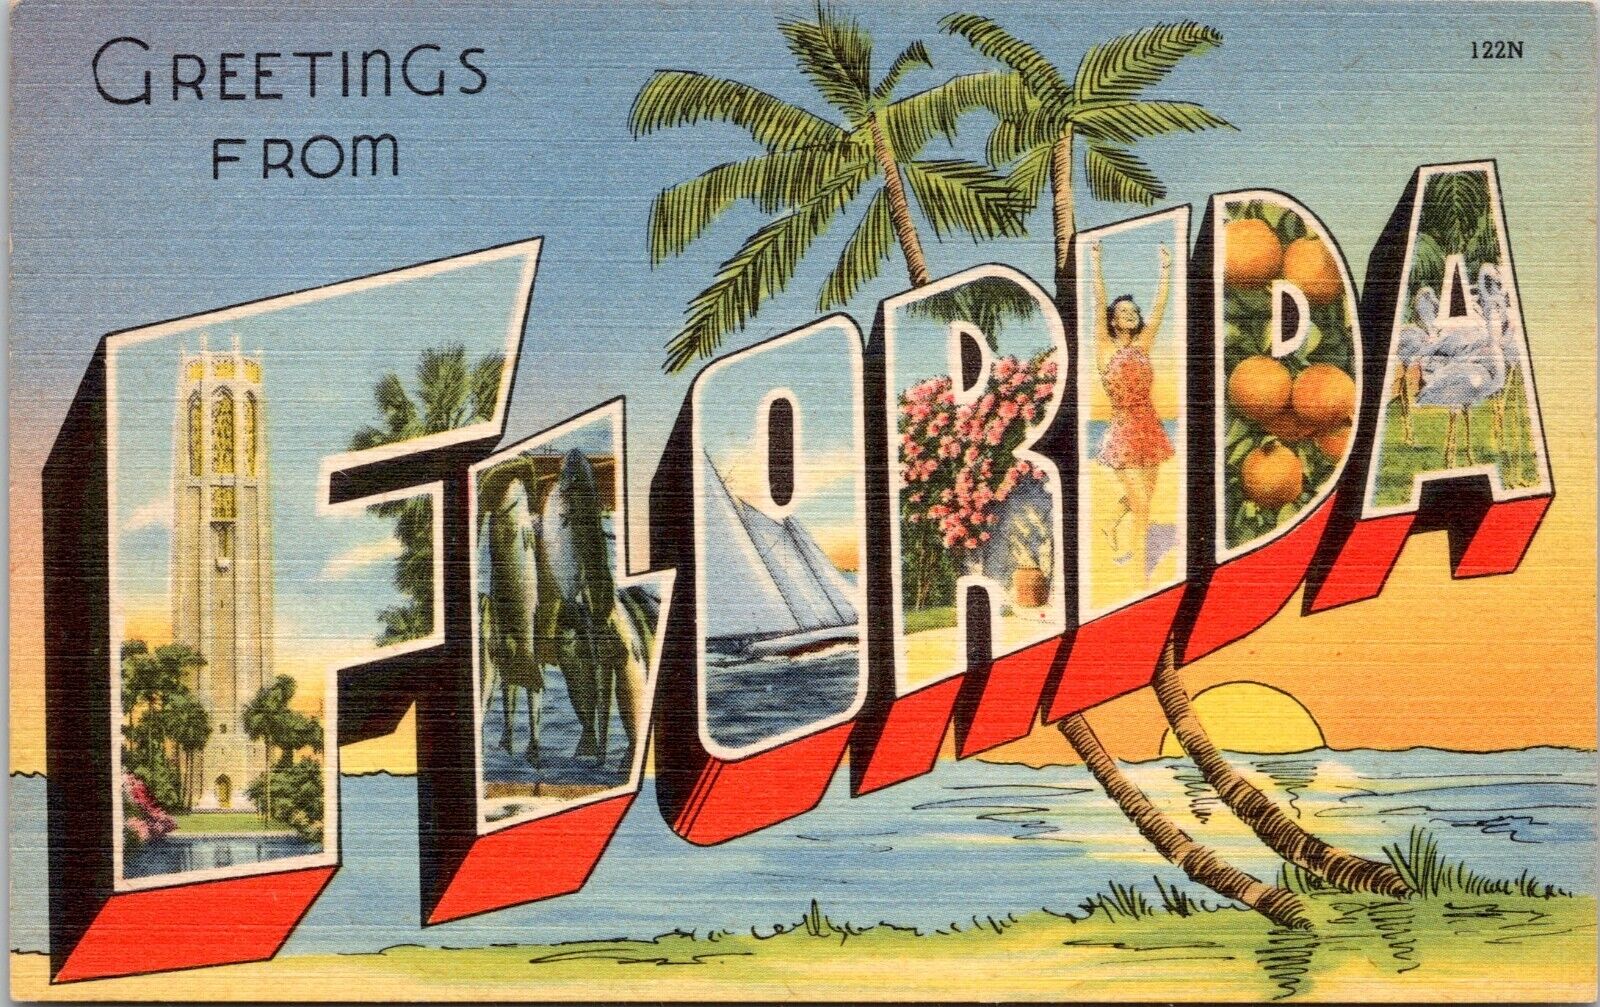 Large Letter Greetings from Florida - c1940s Linen Postcard - Tichnor Brothers